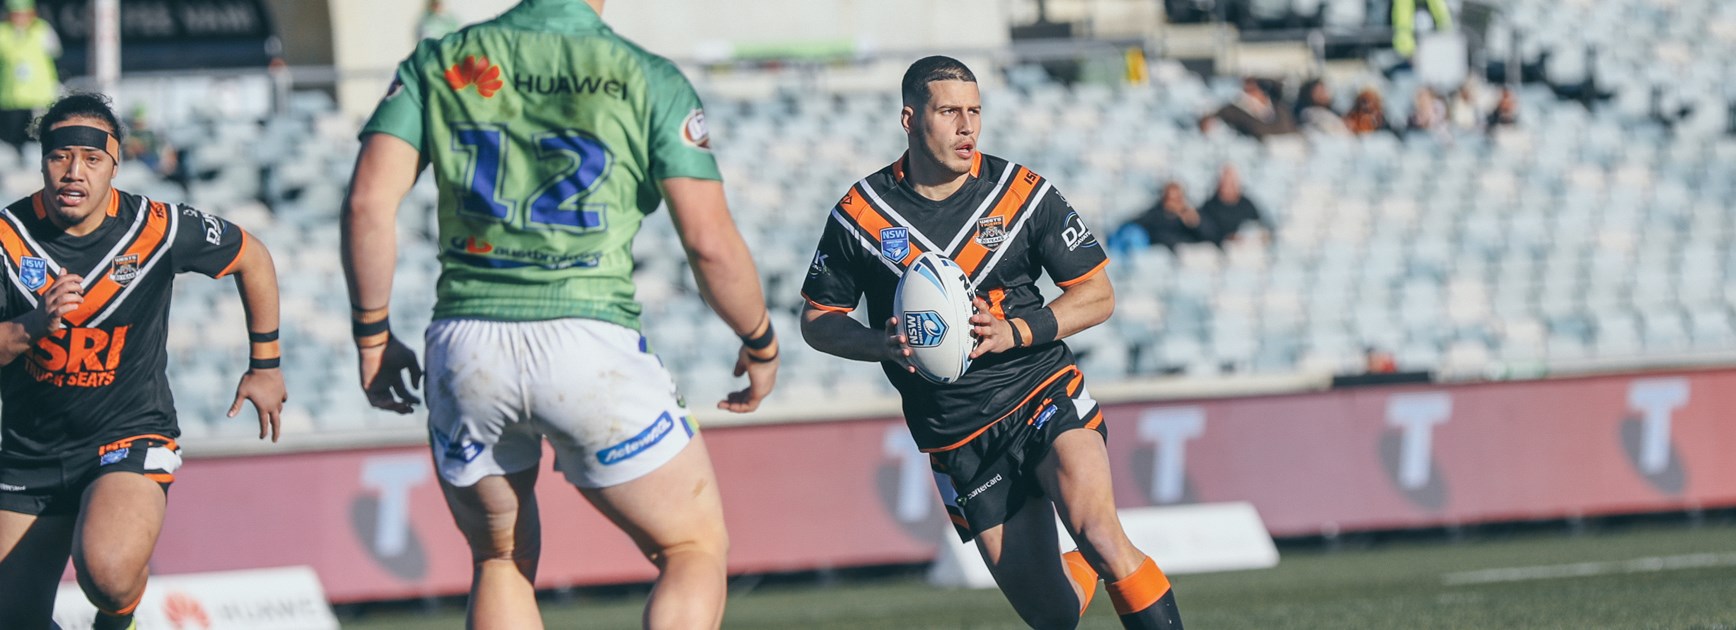 Jersey Flegg Raiders cruise to big win over Wests Tigers